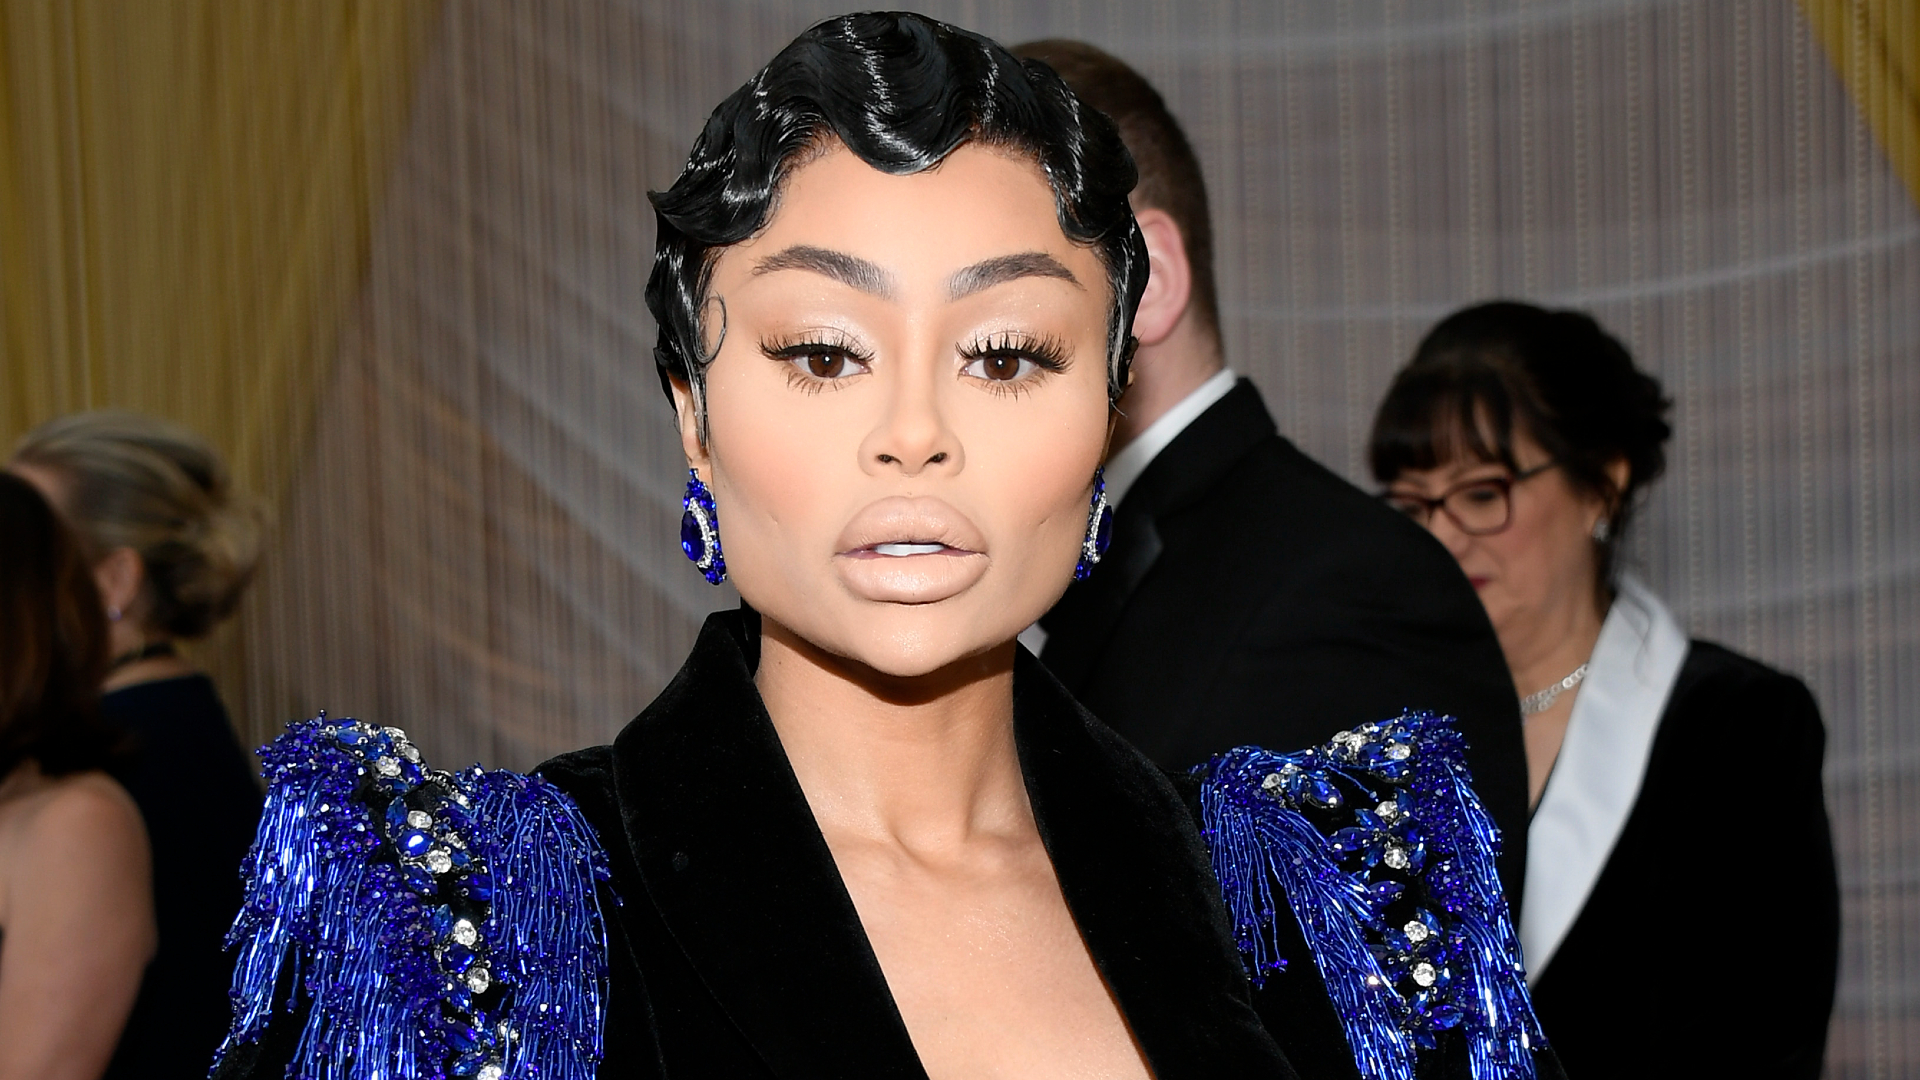 What is Blac Chyna's Net Worth?